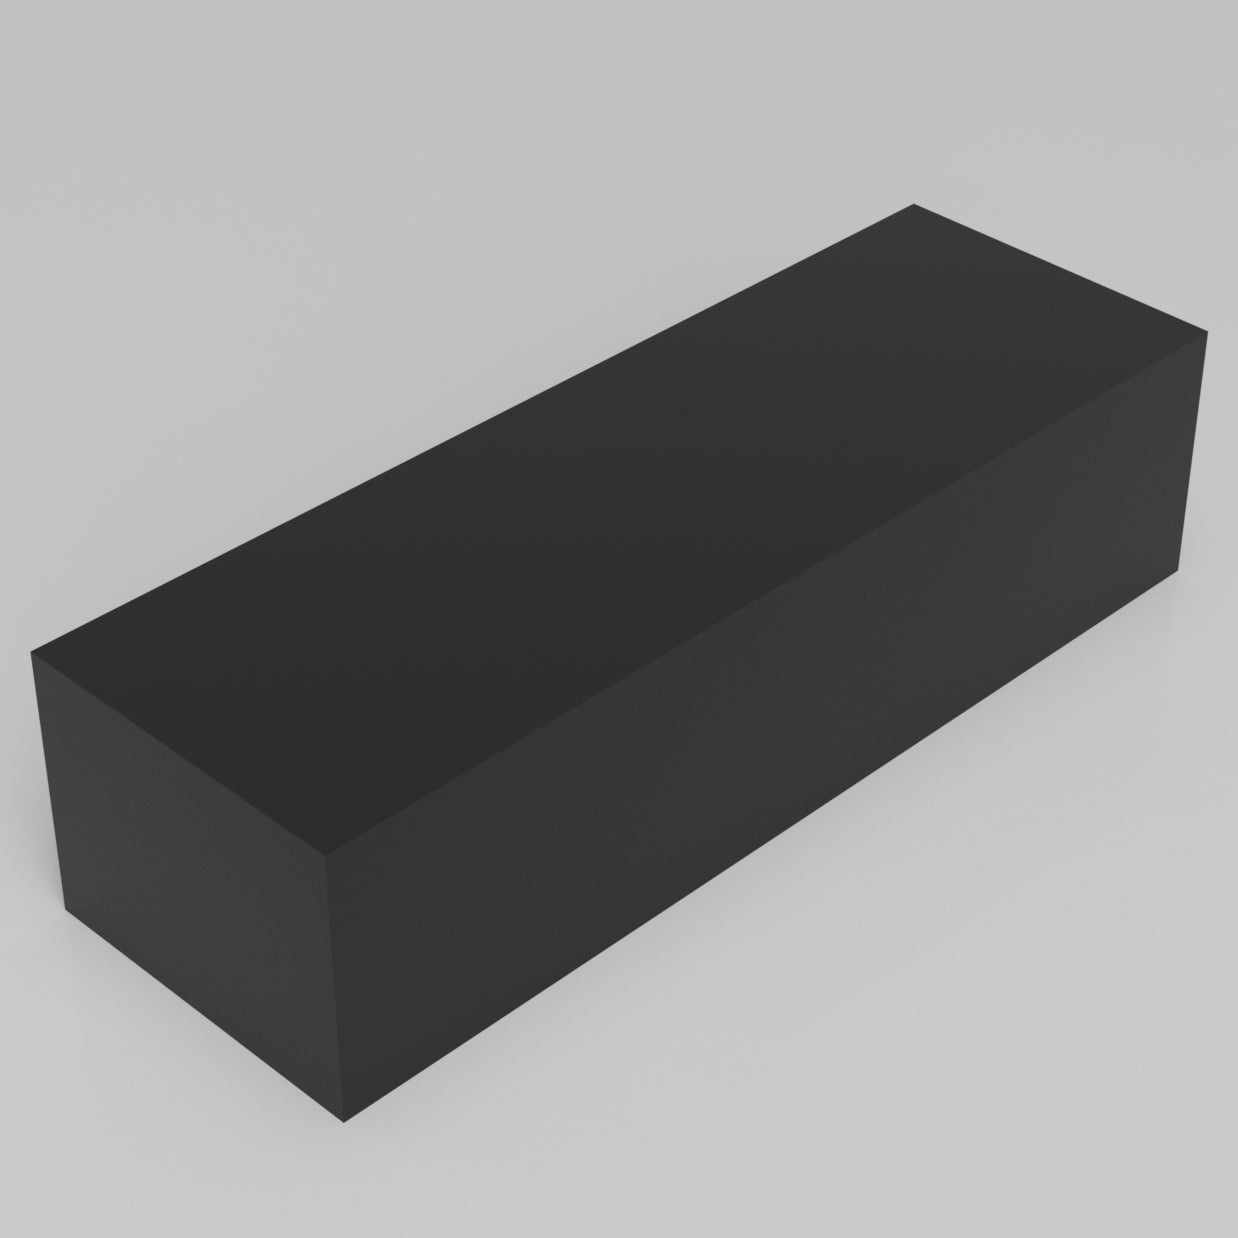 Machinable Wax Rectangular Block Front View 3 Inch by 4 Inch by 12 Inch